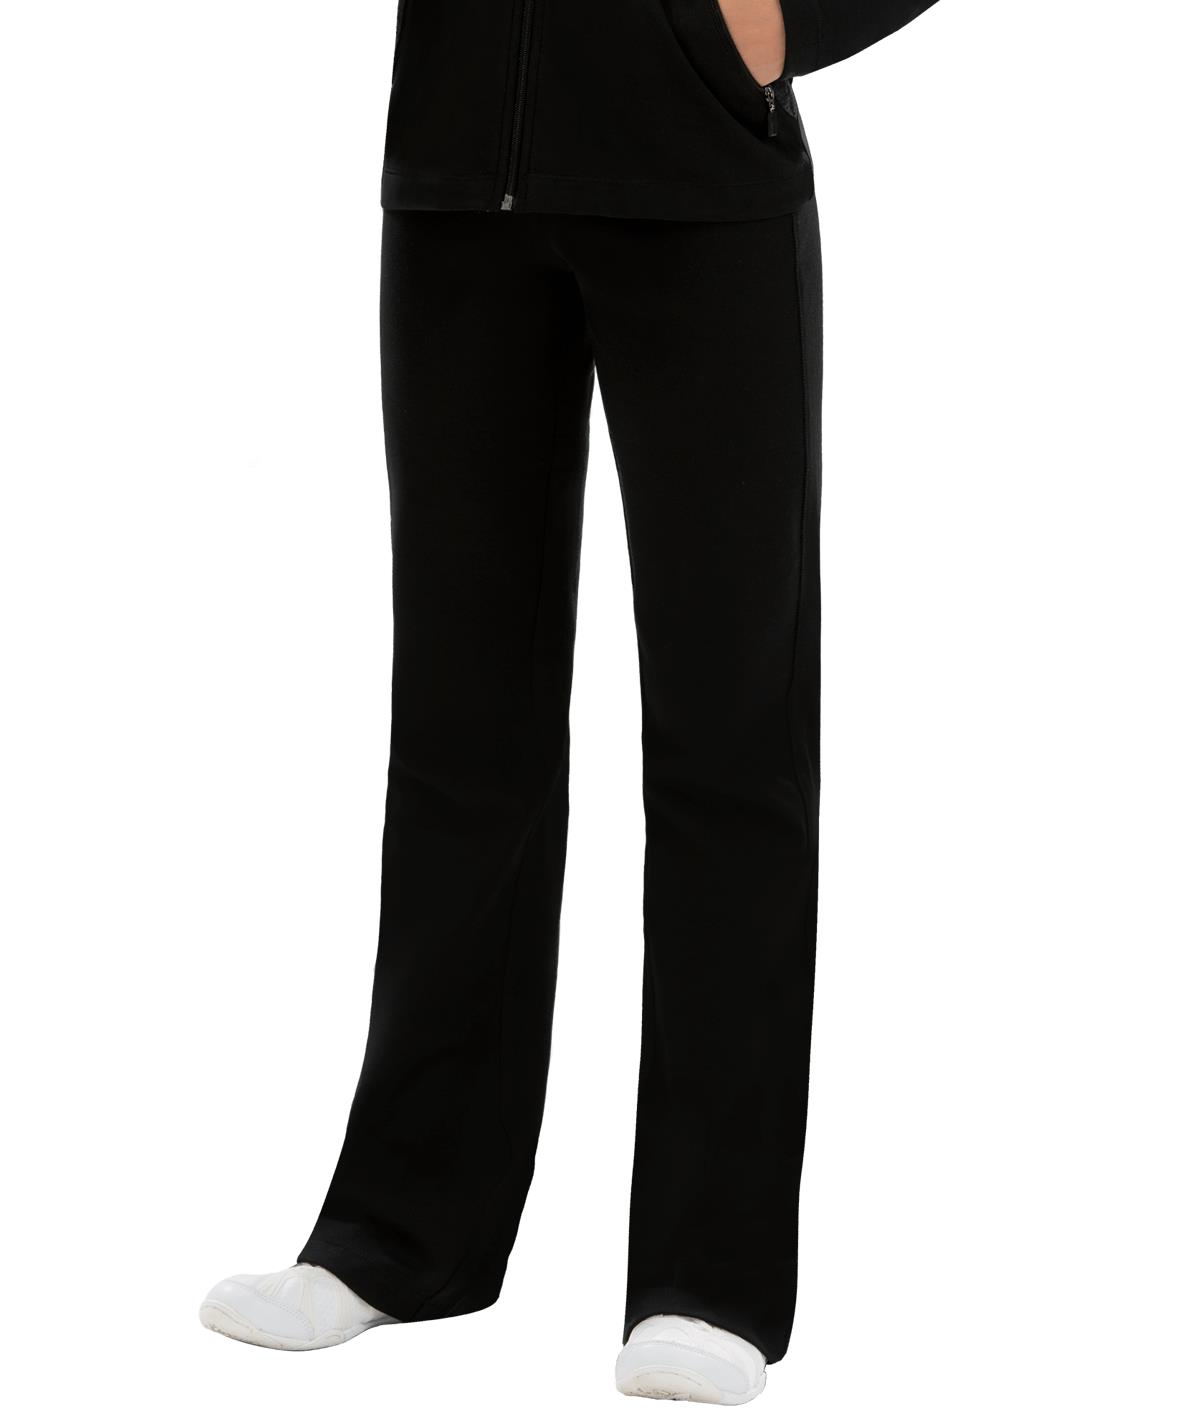 GK Balance Fitted Warmup Pant